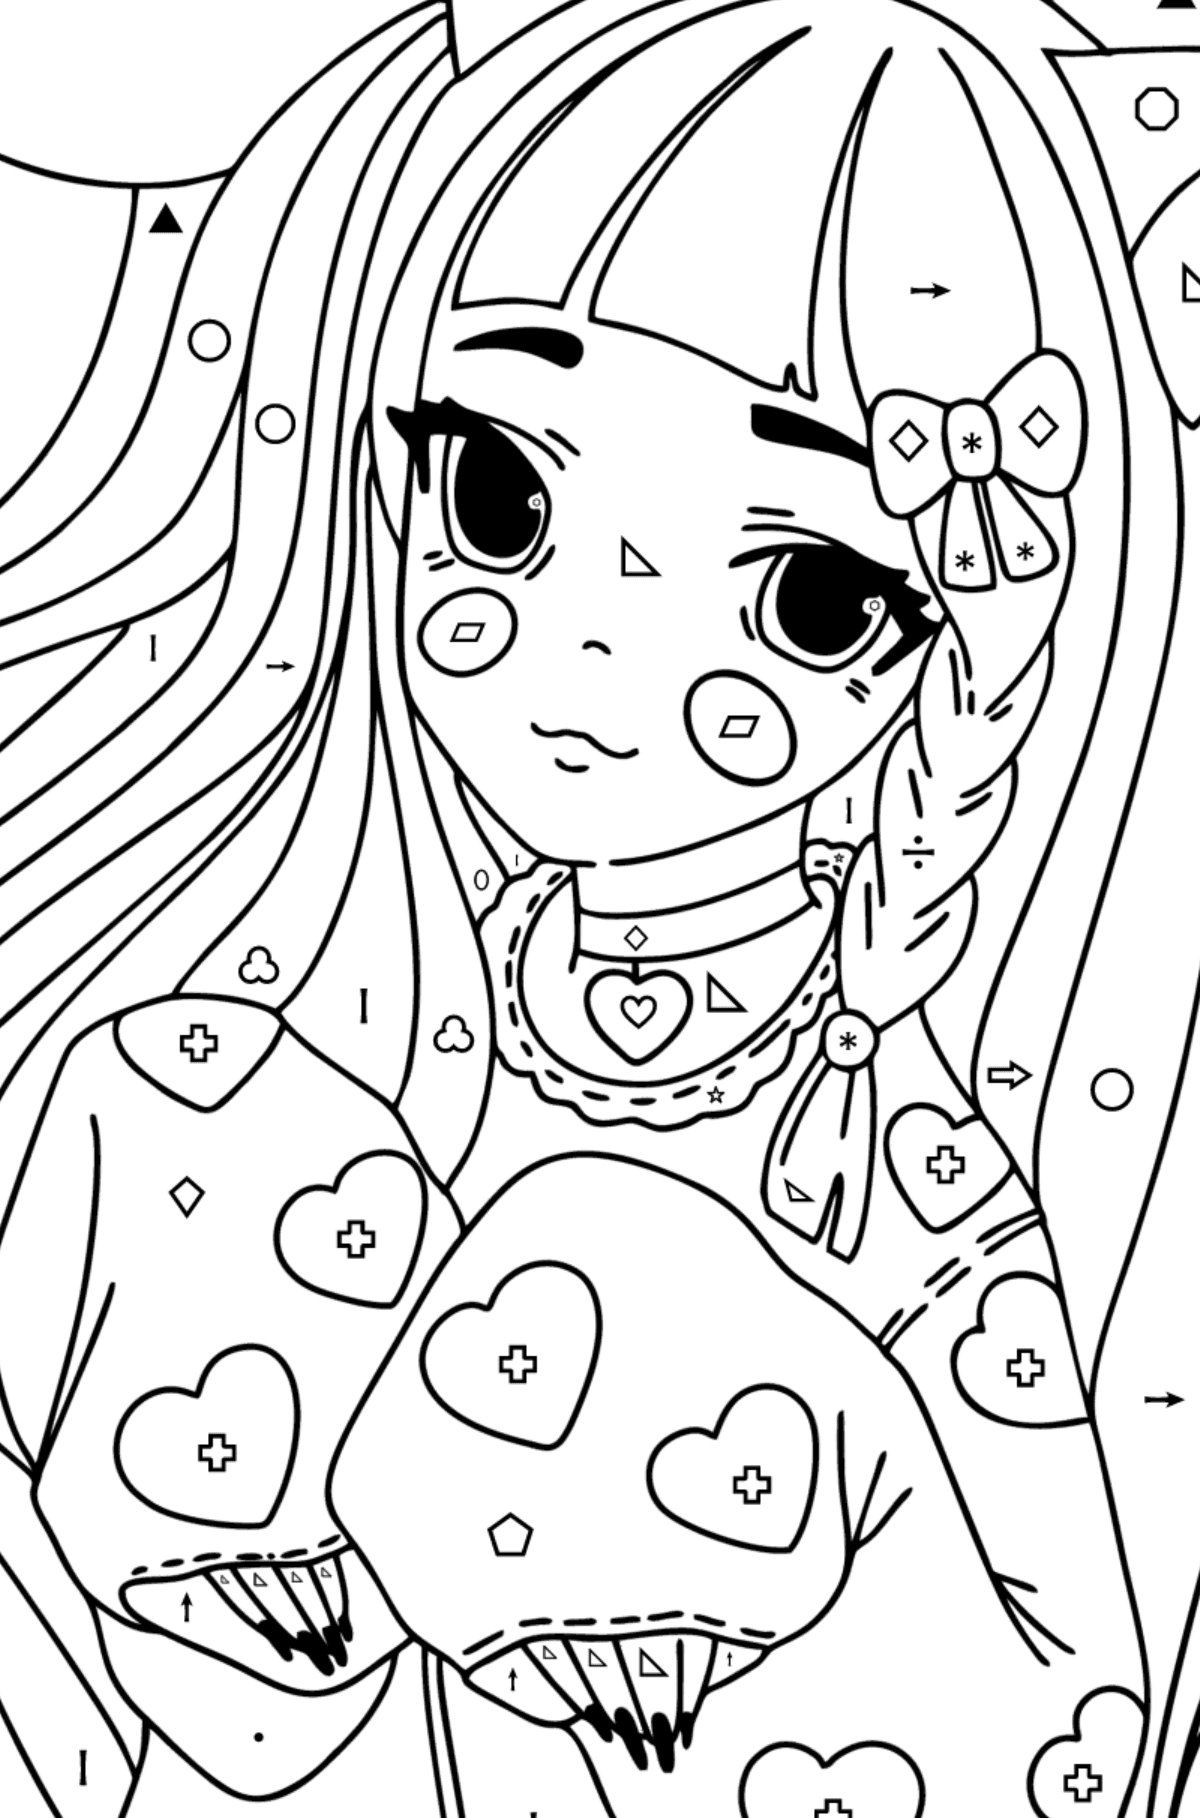 Anime girl with ears and paws coloring page - Coloring by Symbols and Geometric Shapes for Kids